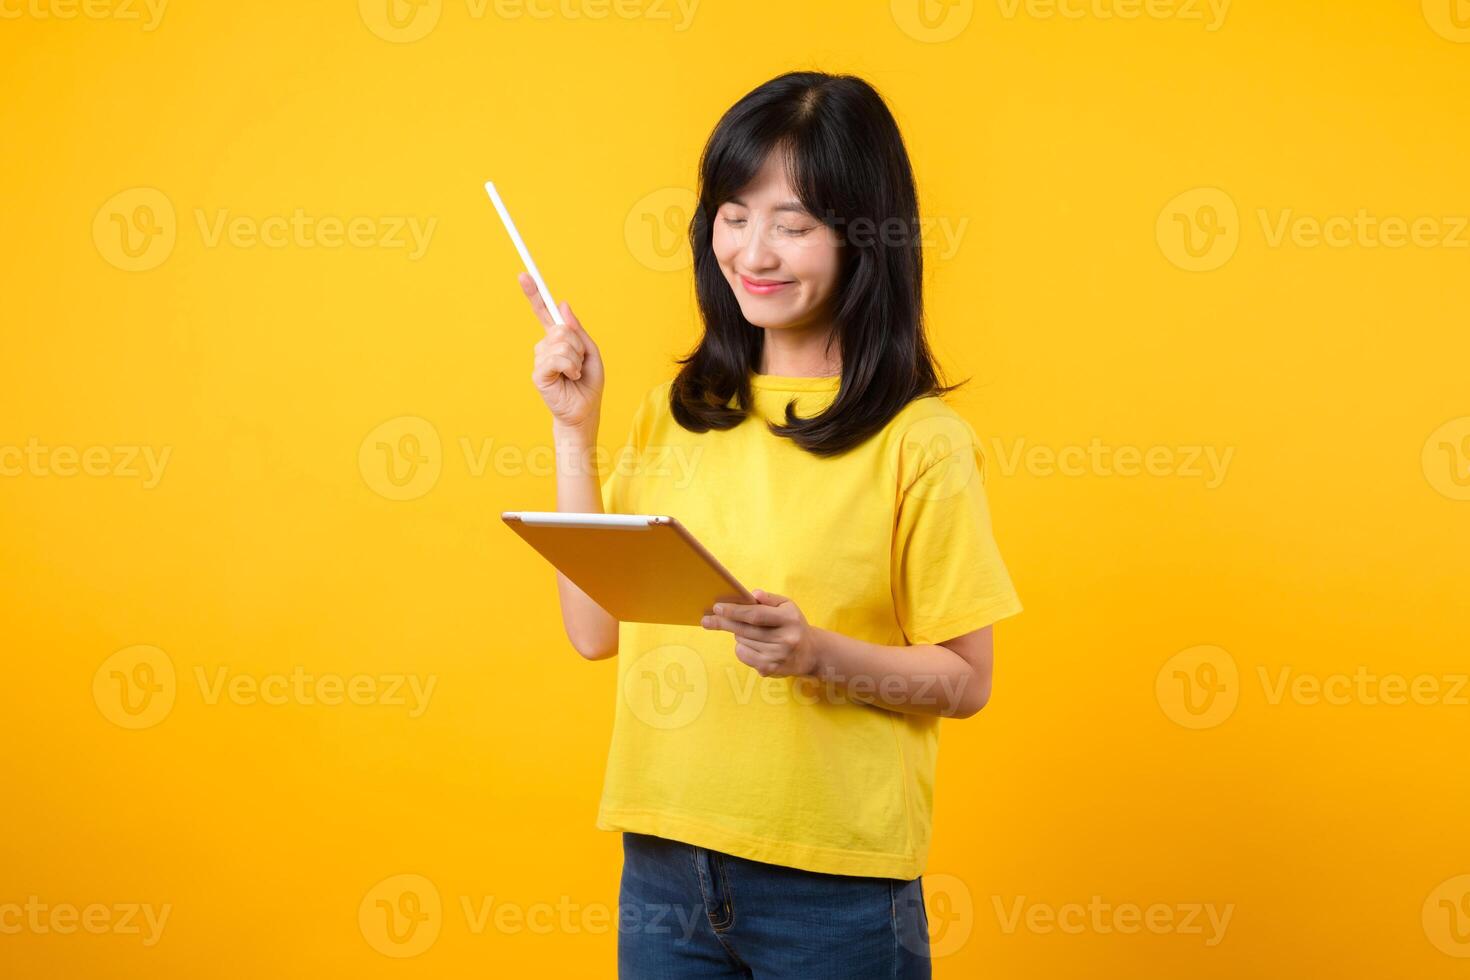 young Asian woman wearing yellow t-shirt and jeans showing happy smile while using digital tablet, displaying thoughtful expression and creative idea. education technology innovative thinking concept. photo